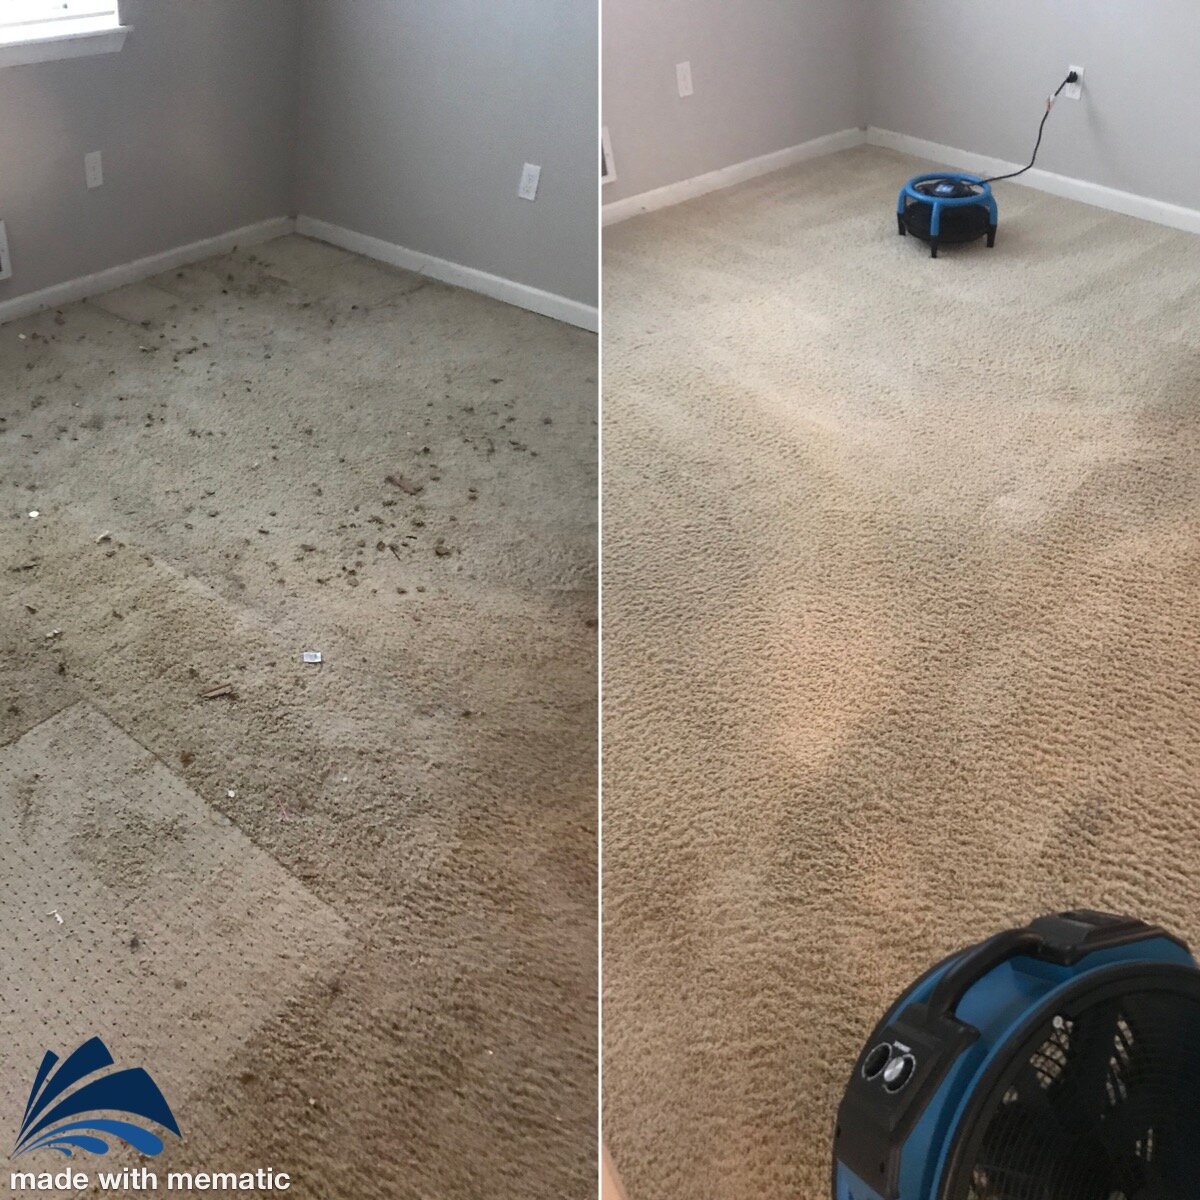 Does carpet dry faster in warm weather? — Sno-King Carpet & Upholstery  Cleaning- Local and Family Owned